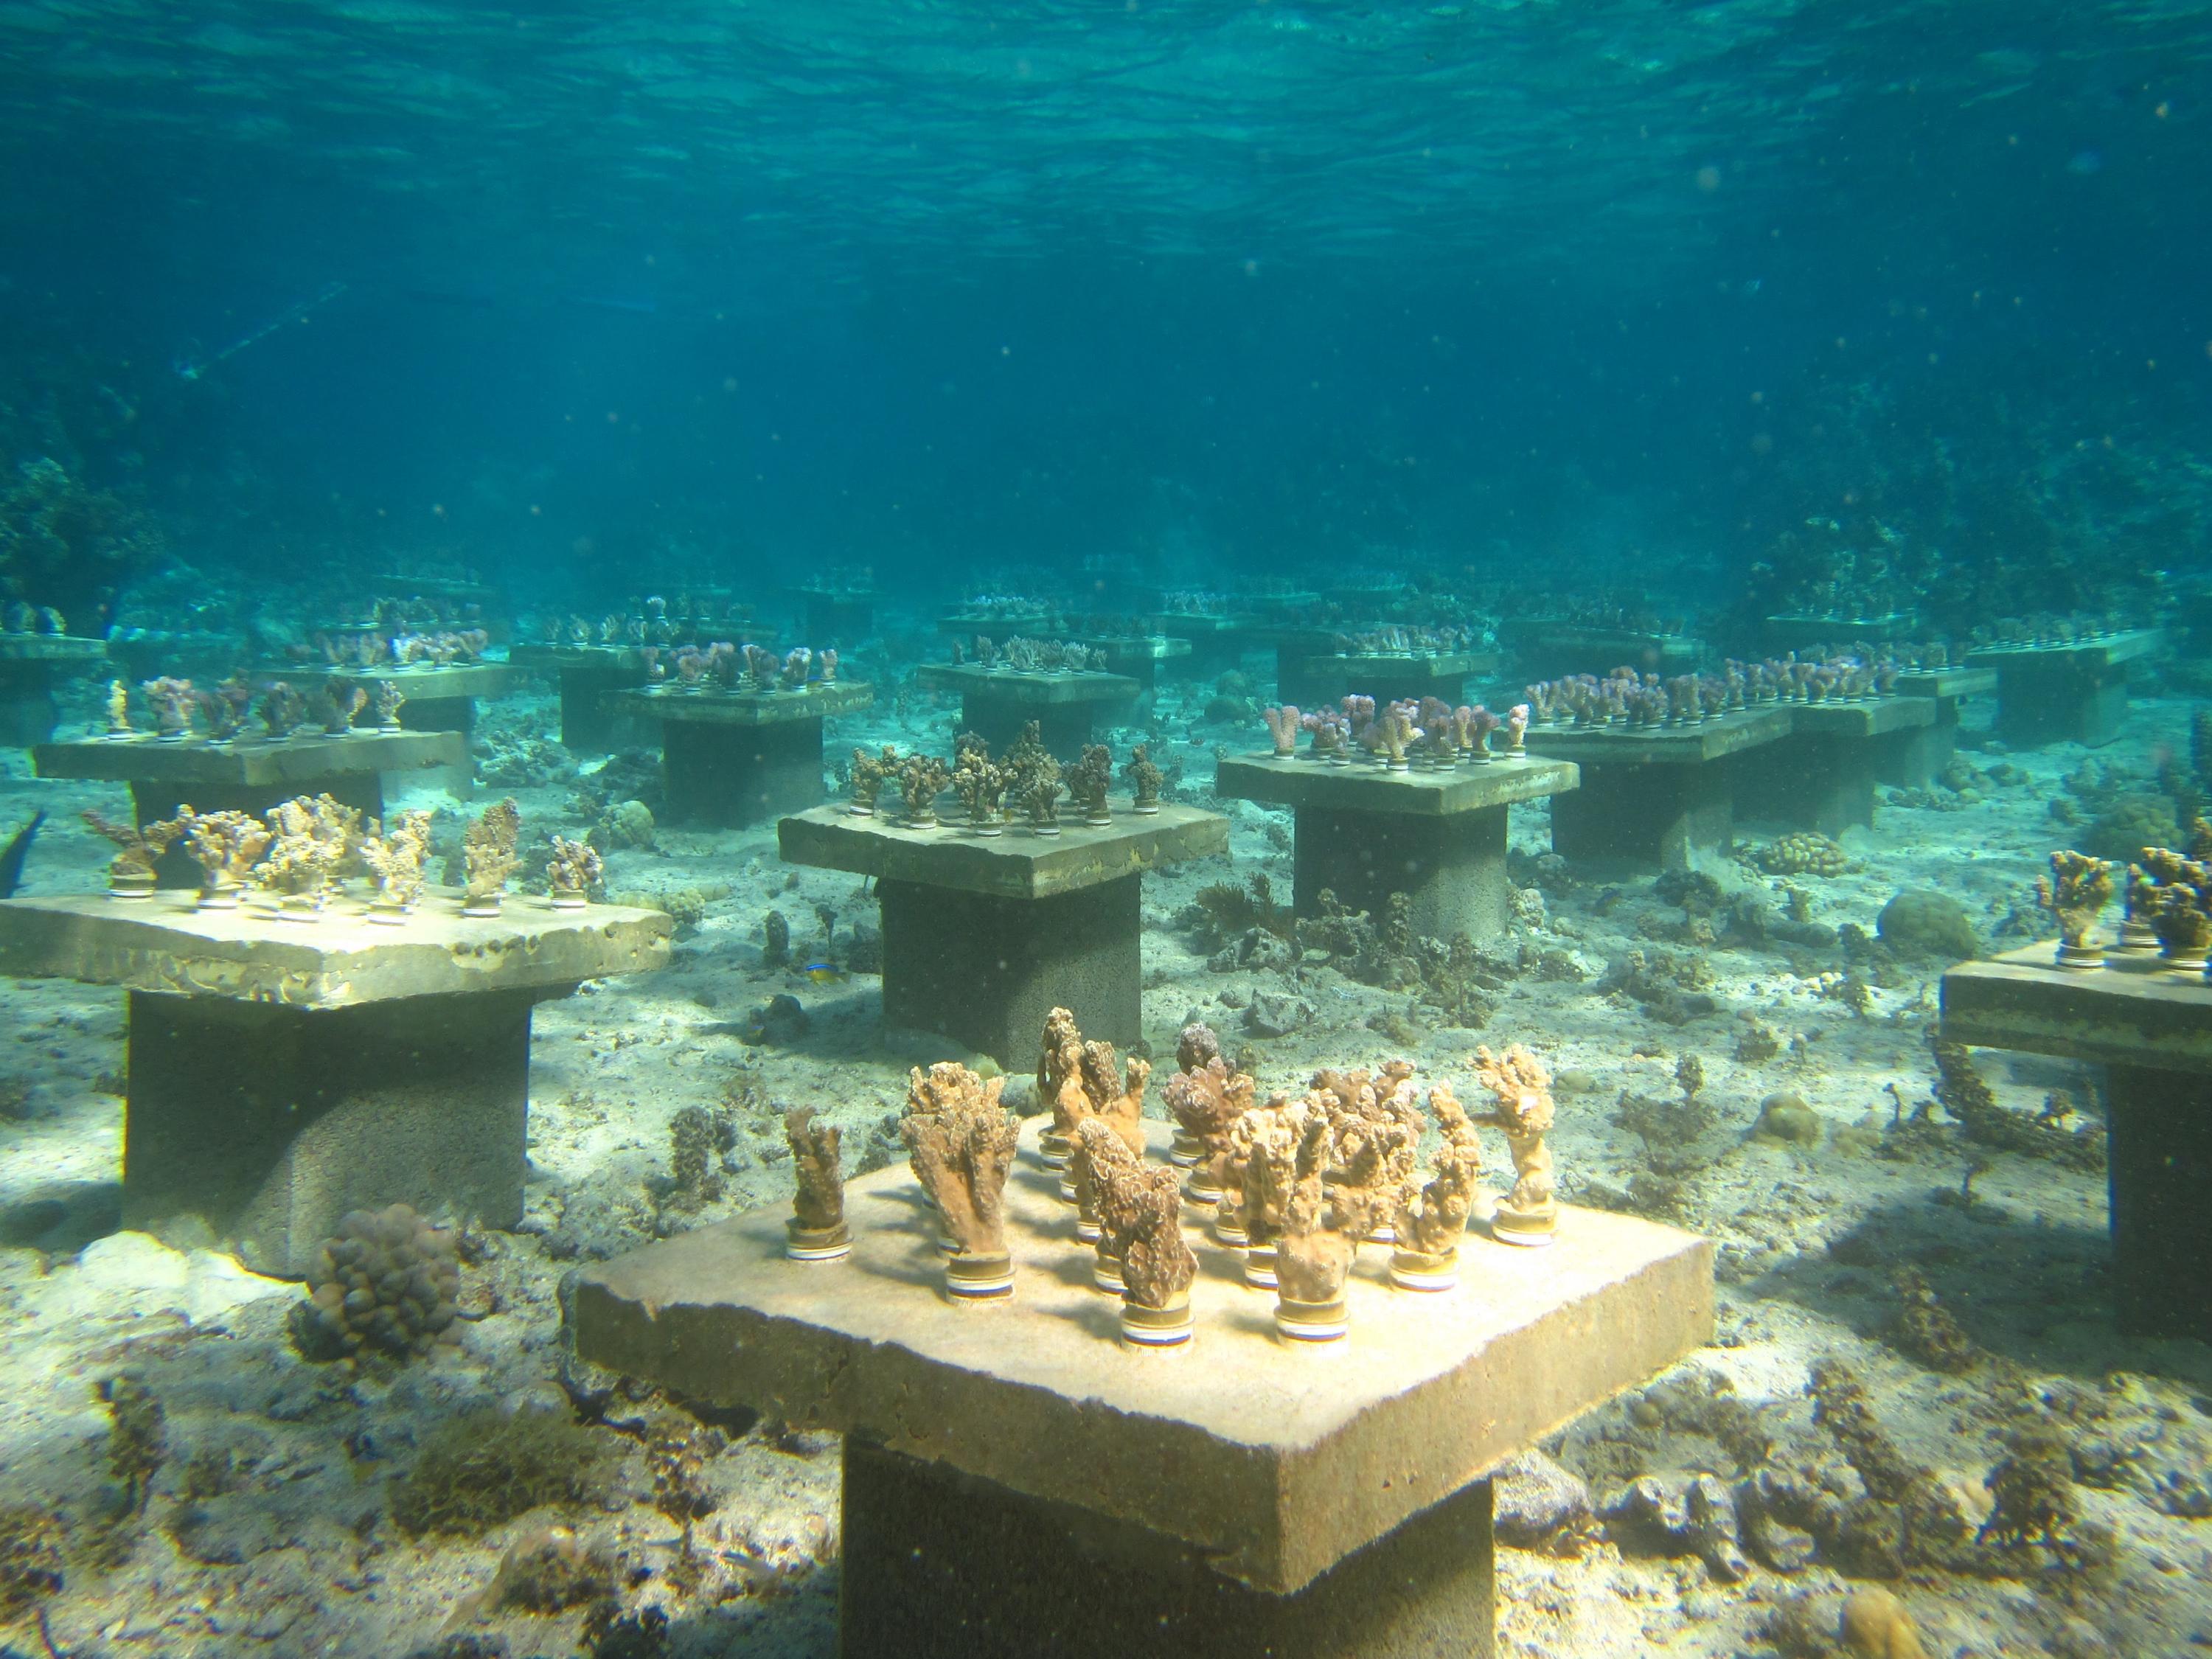 Coral diversity on display in the underwater gardens set up by Georgia Tech researchers near French Polynesia. (Photo Cody Clements) 